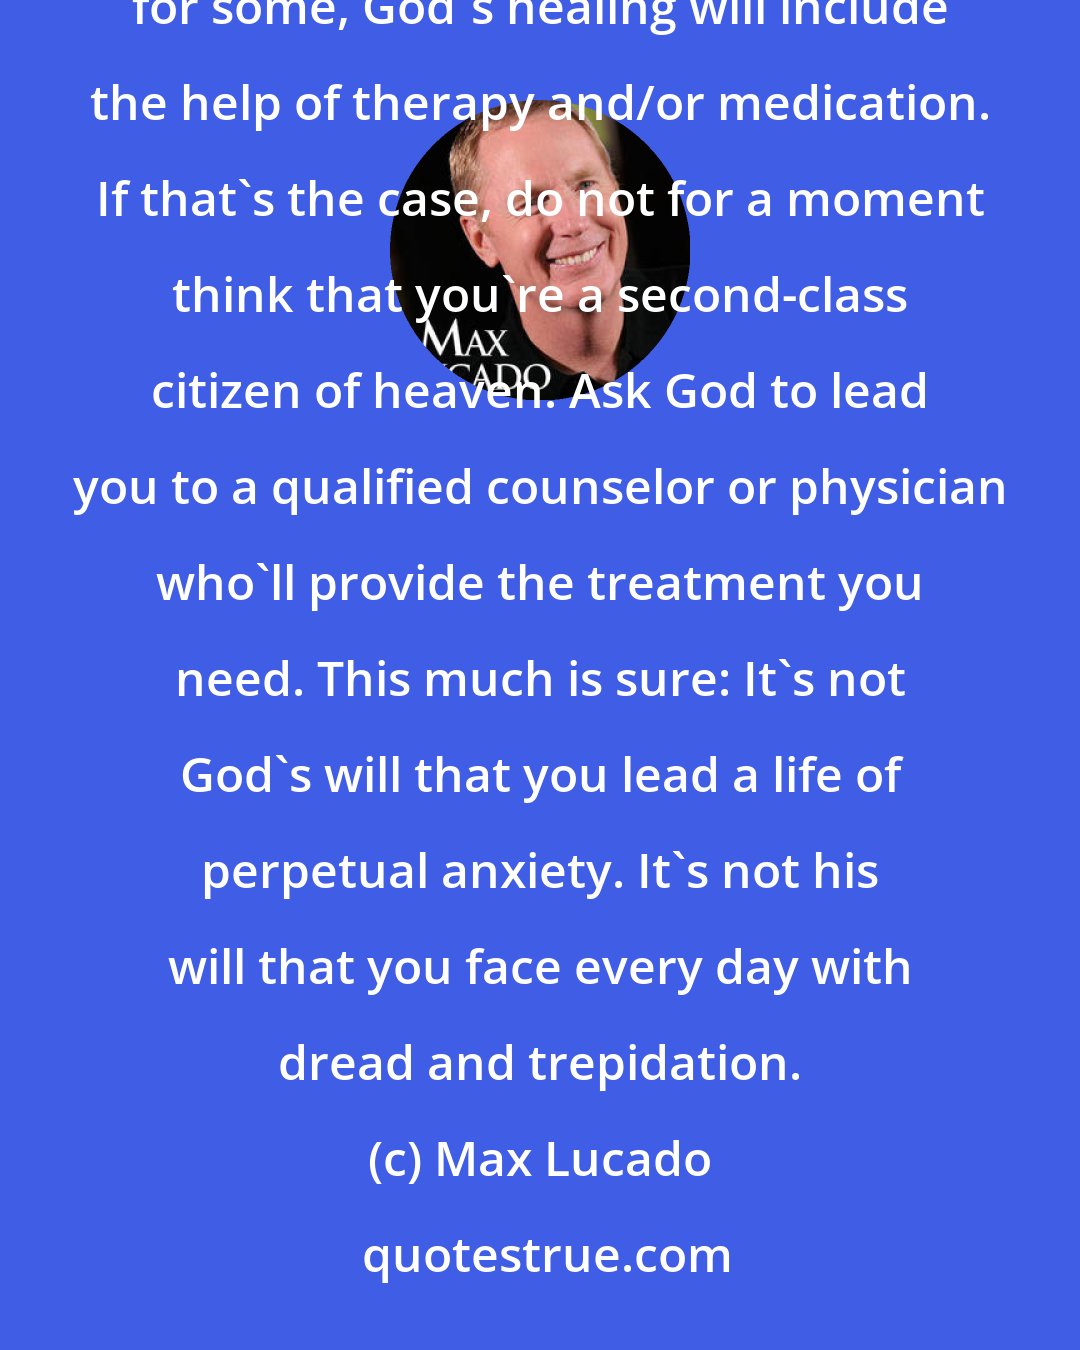 Max Lucado: I certainly don't mean to leave the impression that anxiety can be waved away with a simple pep talk. In fact, for some, God's healing will include the help of therapy and/or medication. If that's the case, do not for a moment think that you're a second-class citizen of heaven. Ask God to lead you to a qualified counselor or physician who'll provide the treatment you need. This much is sure: It's not God's will that you lead a life of perpetual anxiety. It's not his will that you face every day with dread and trepidation.